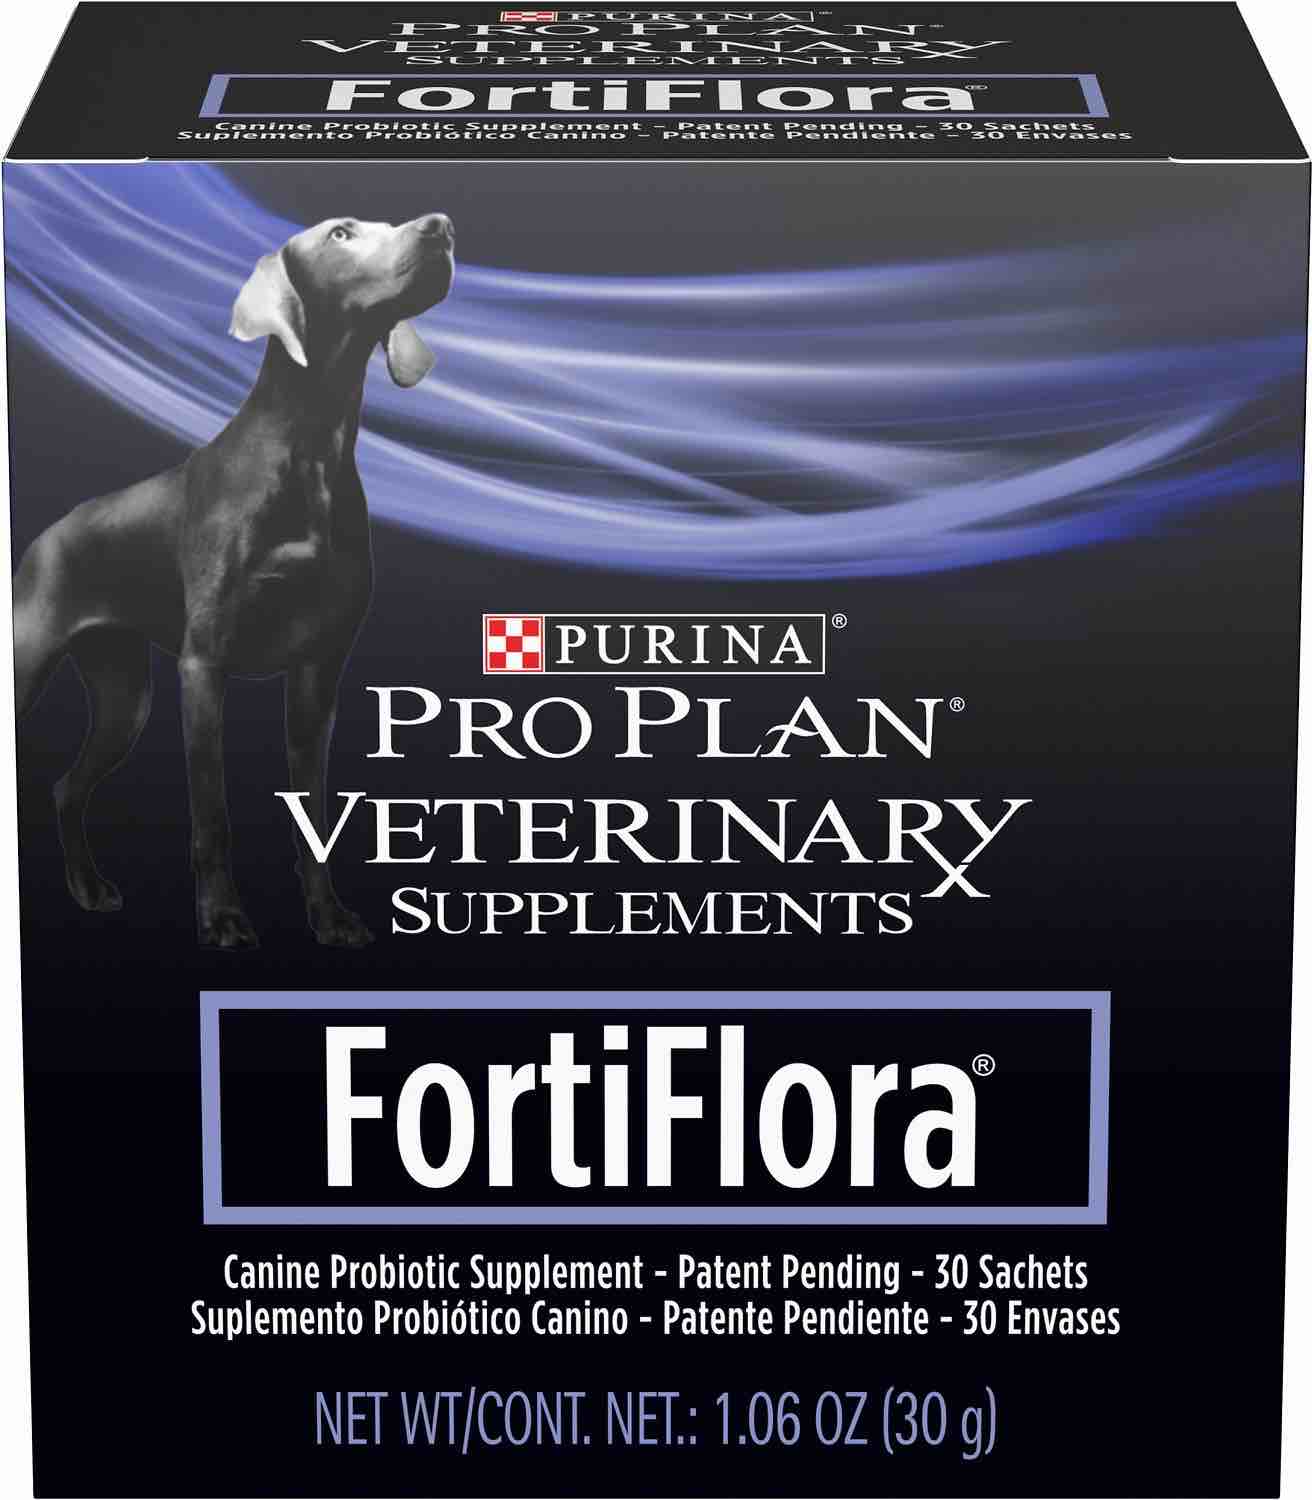 Purina Pro Plan Veterinary Supplements FortiFlora Powder for Dogs